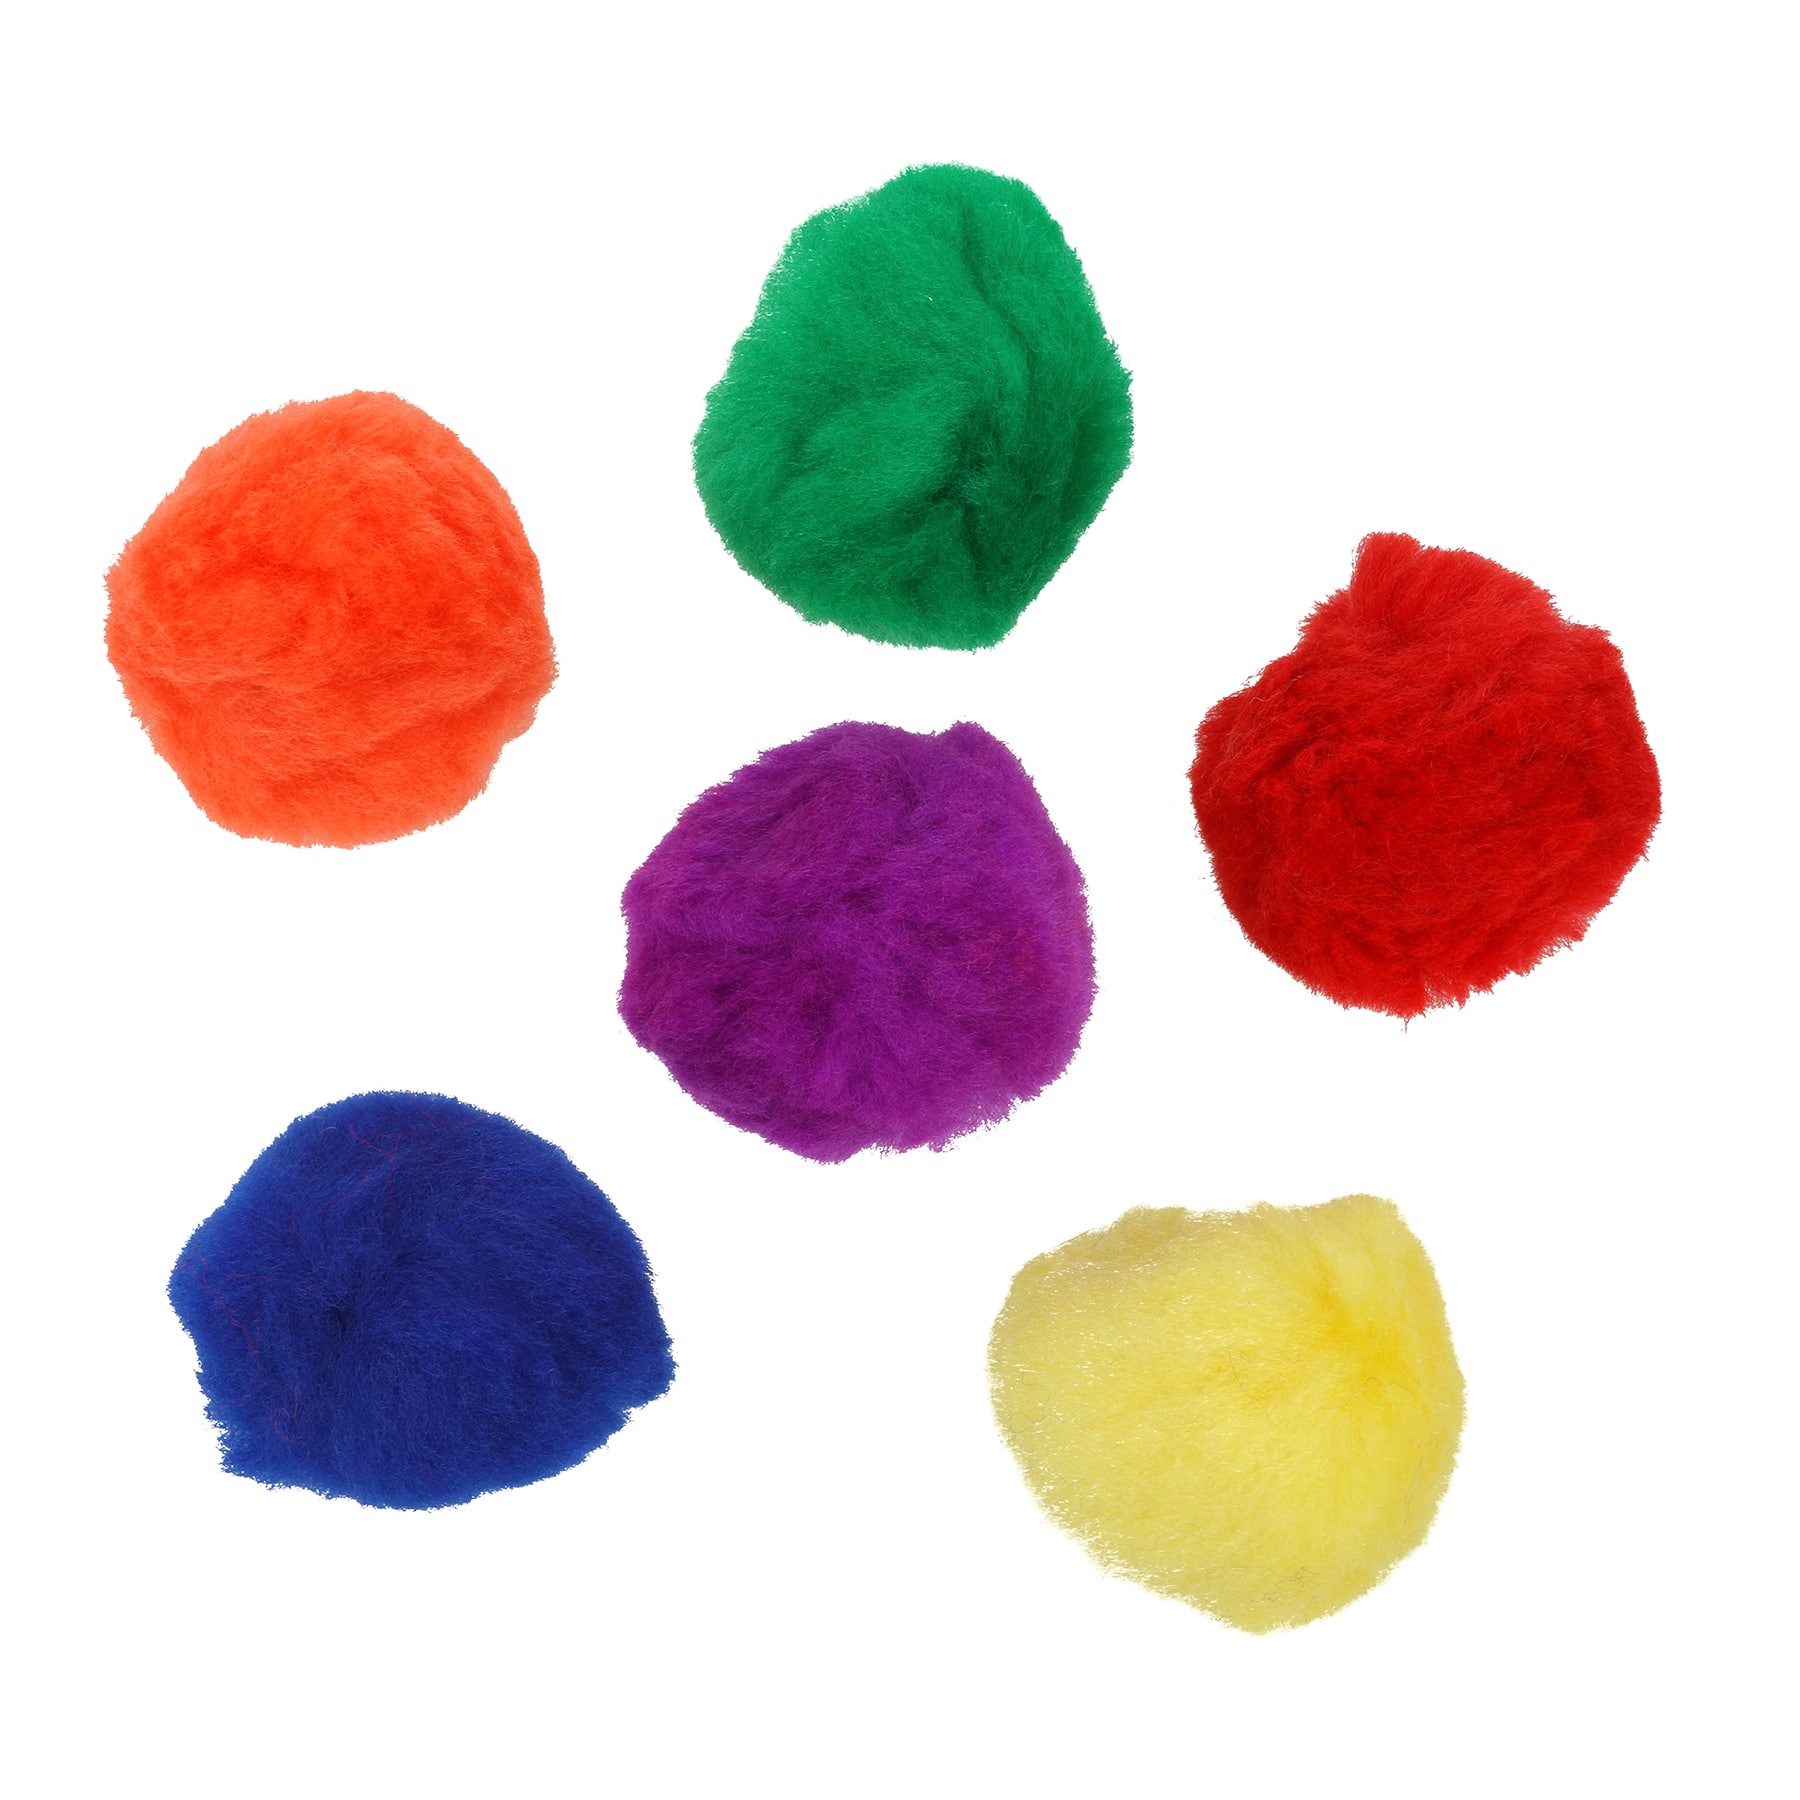 12 Packs: 20 ct. (240 total) 2&#x22; Rainbow Mix Pom Poms by Creatology&#x2122;